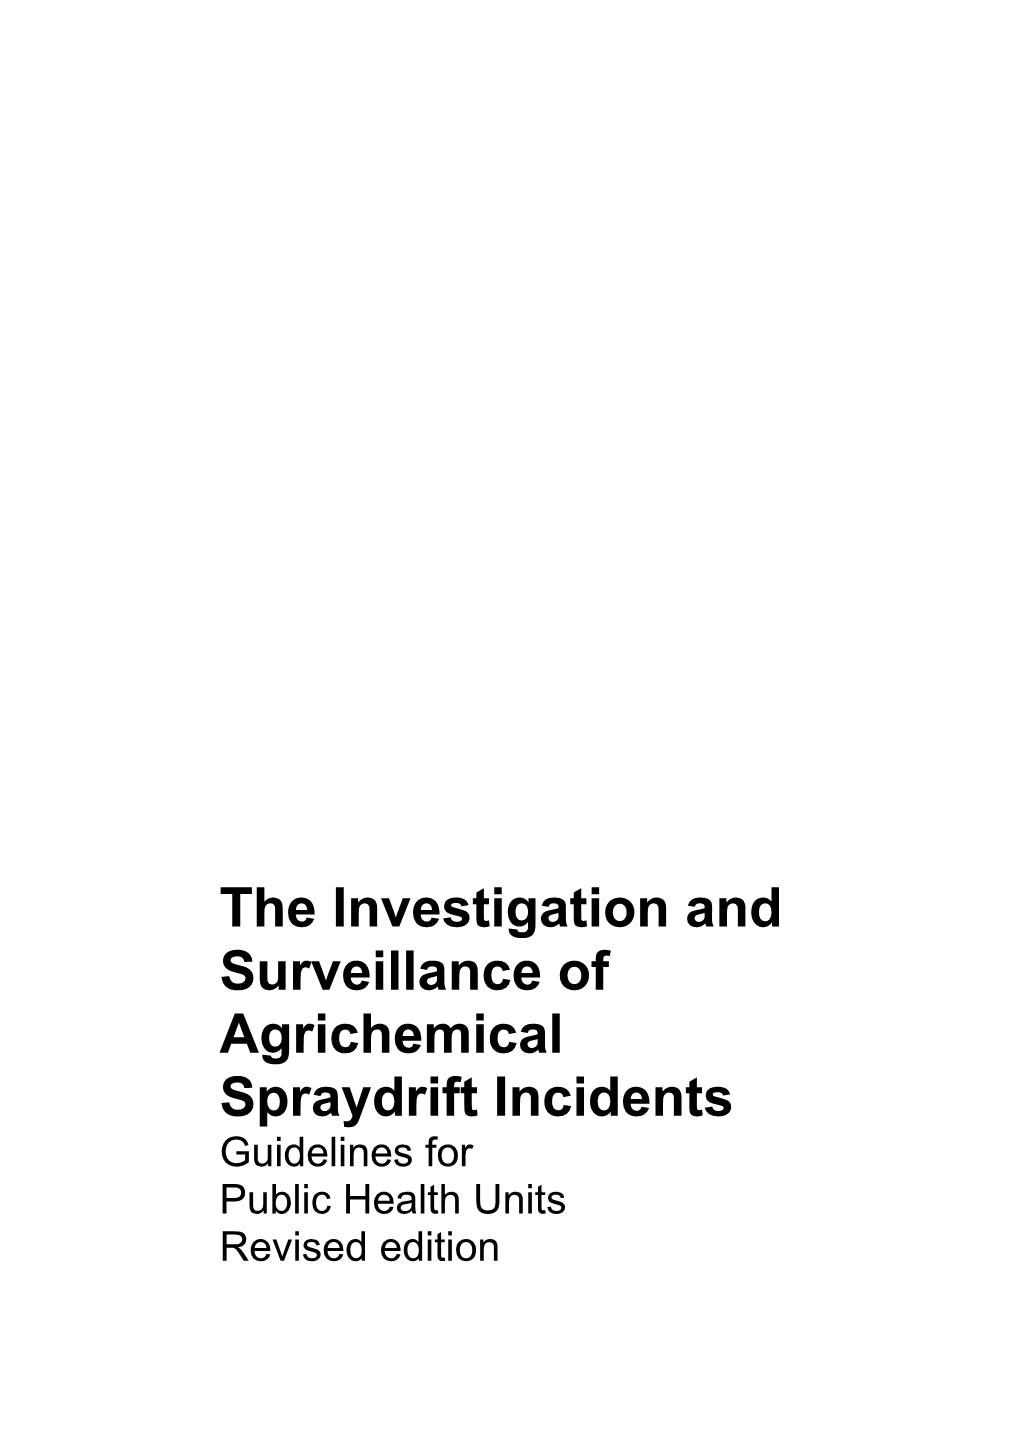 The Investigation and Surveillance of Agrichemical Spraydrift Incidents